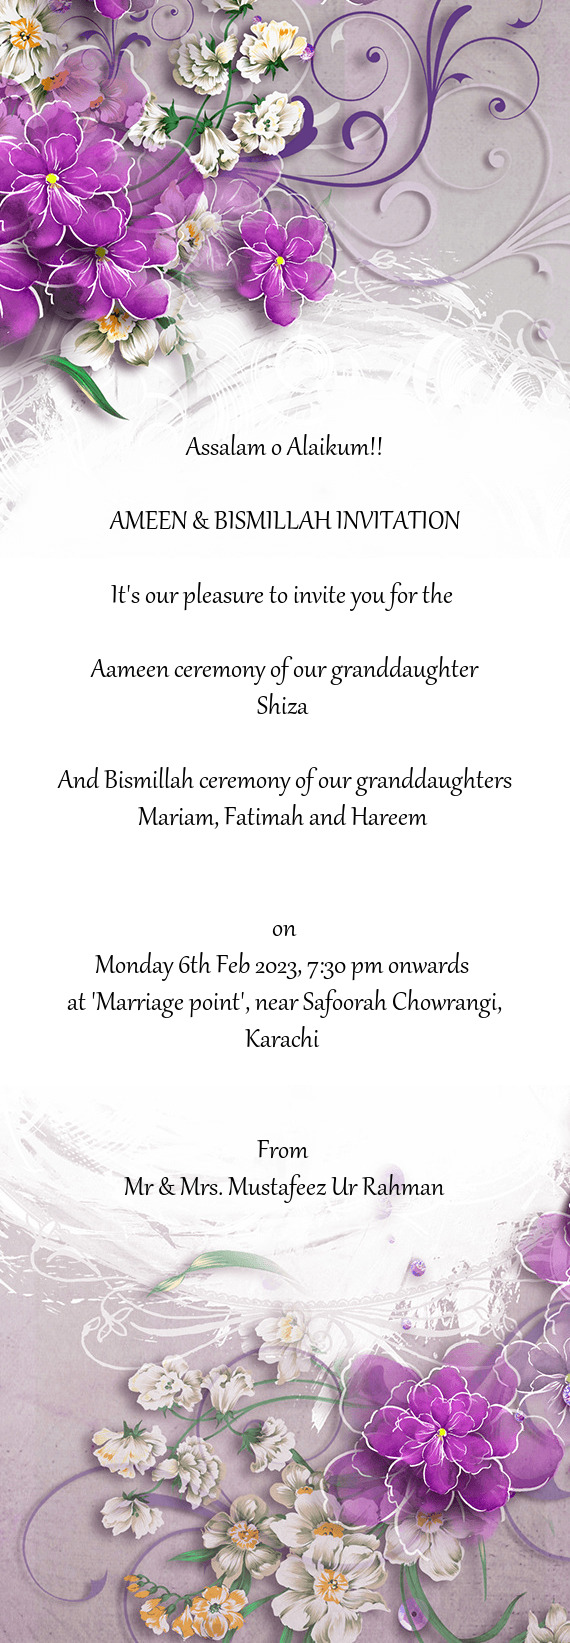 Aameen ceremony of our granddaughter